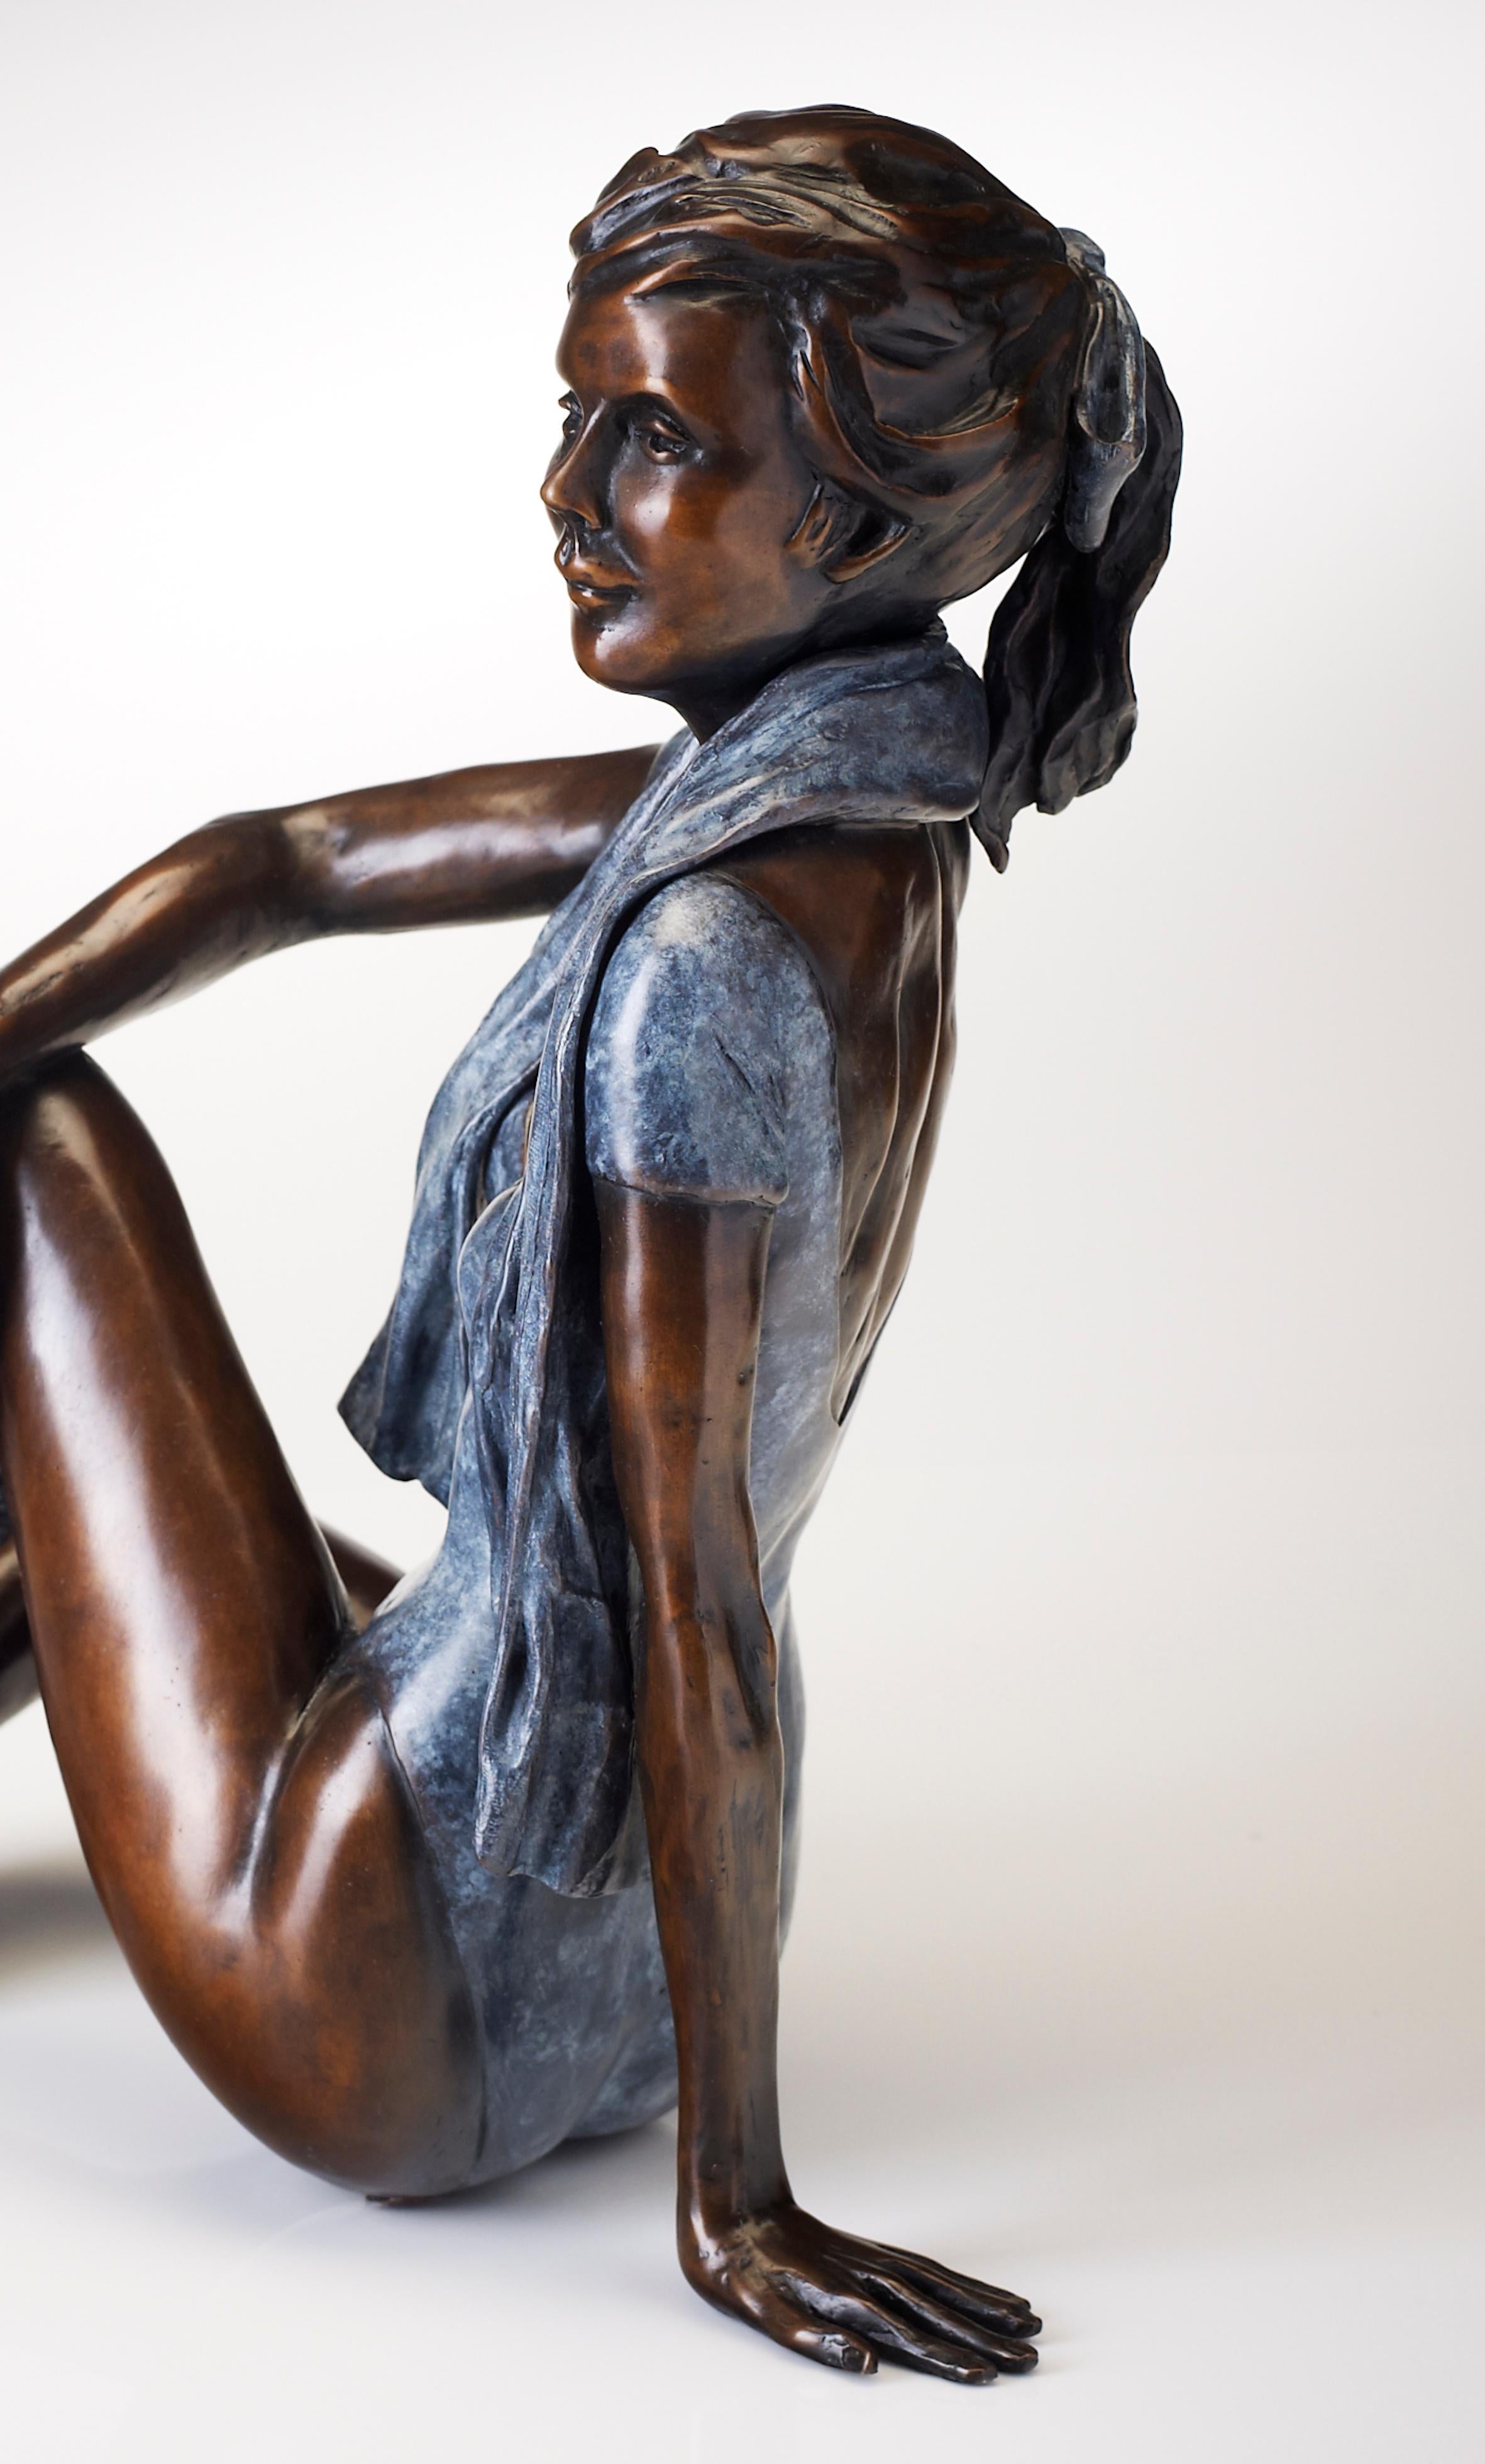 'Attitude' by Benson Landes is a stunning 20th Century Solid Bronze Nude Figurative Ballet Dancer.
For Benson Landes, sculpture was most definitely a passion. His oeuvre of cast bronzes is populated with ‘off duty’ ballet dancers, rather wistful